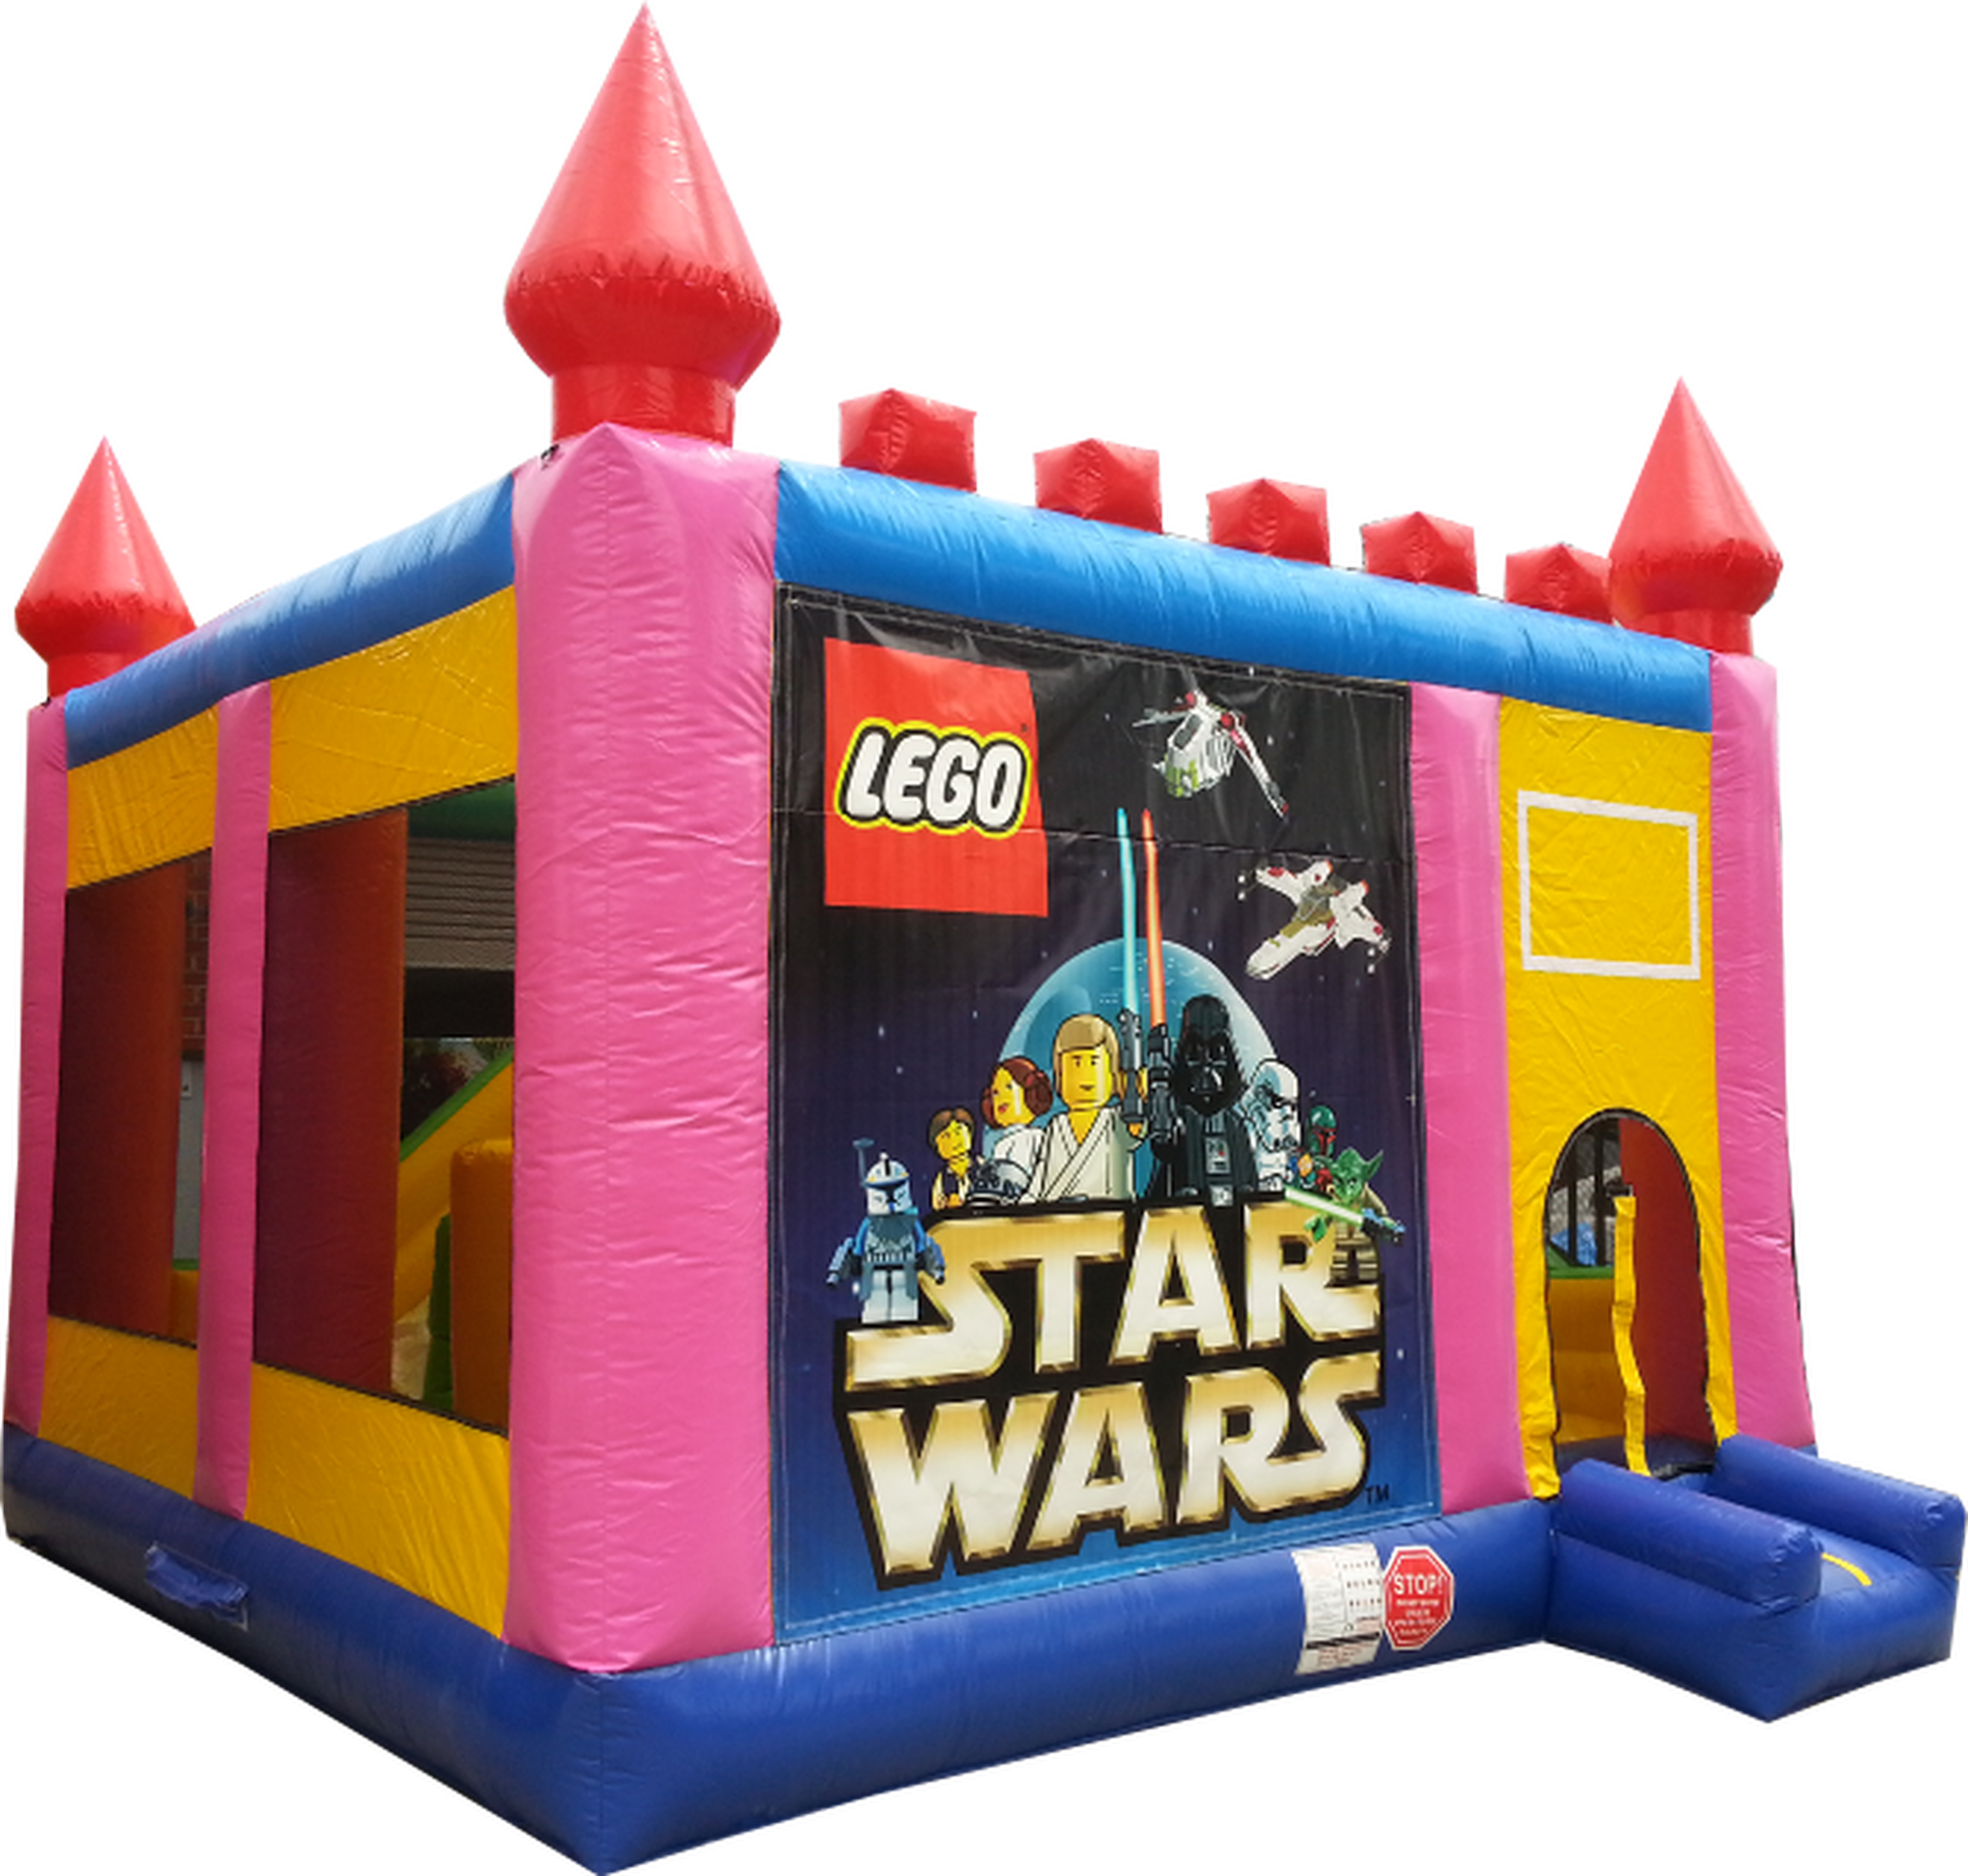 Lego Star Wars Jumping Castle - Lego Jumping Castle (2000x1907)